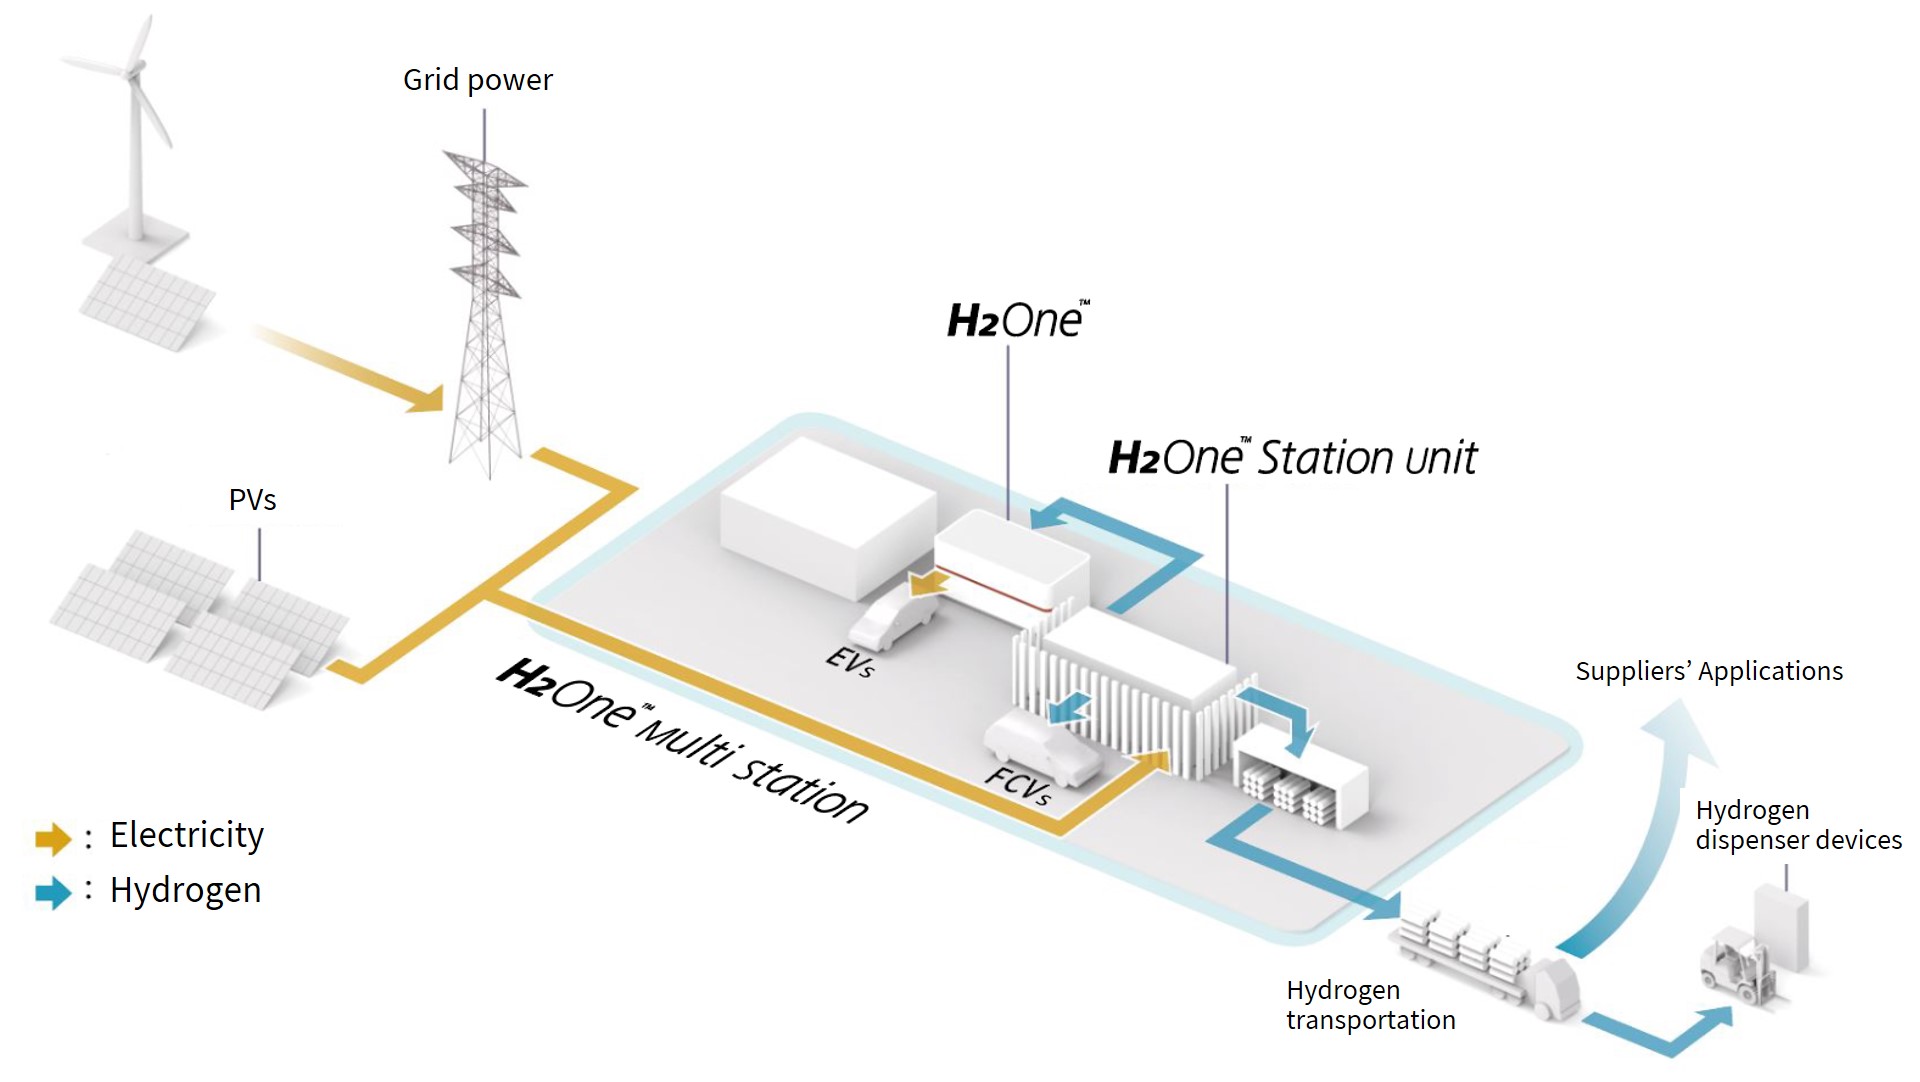 Hydrogen Supply Chain Model using the H2One™ Multi Station Image